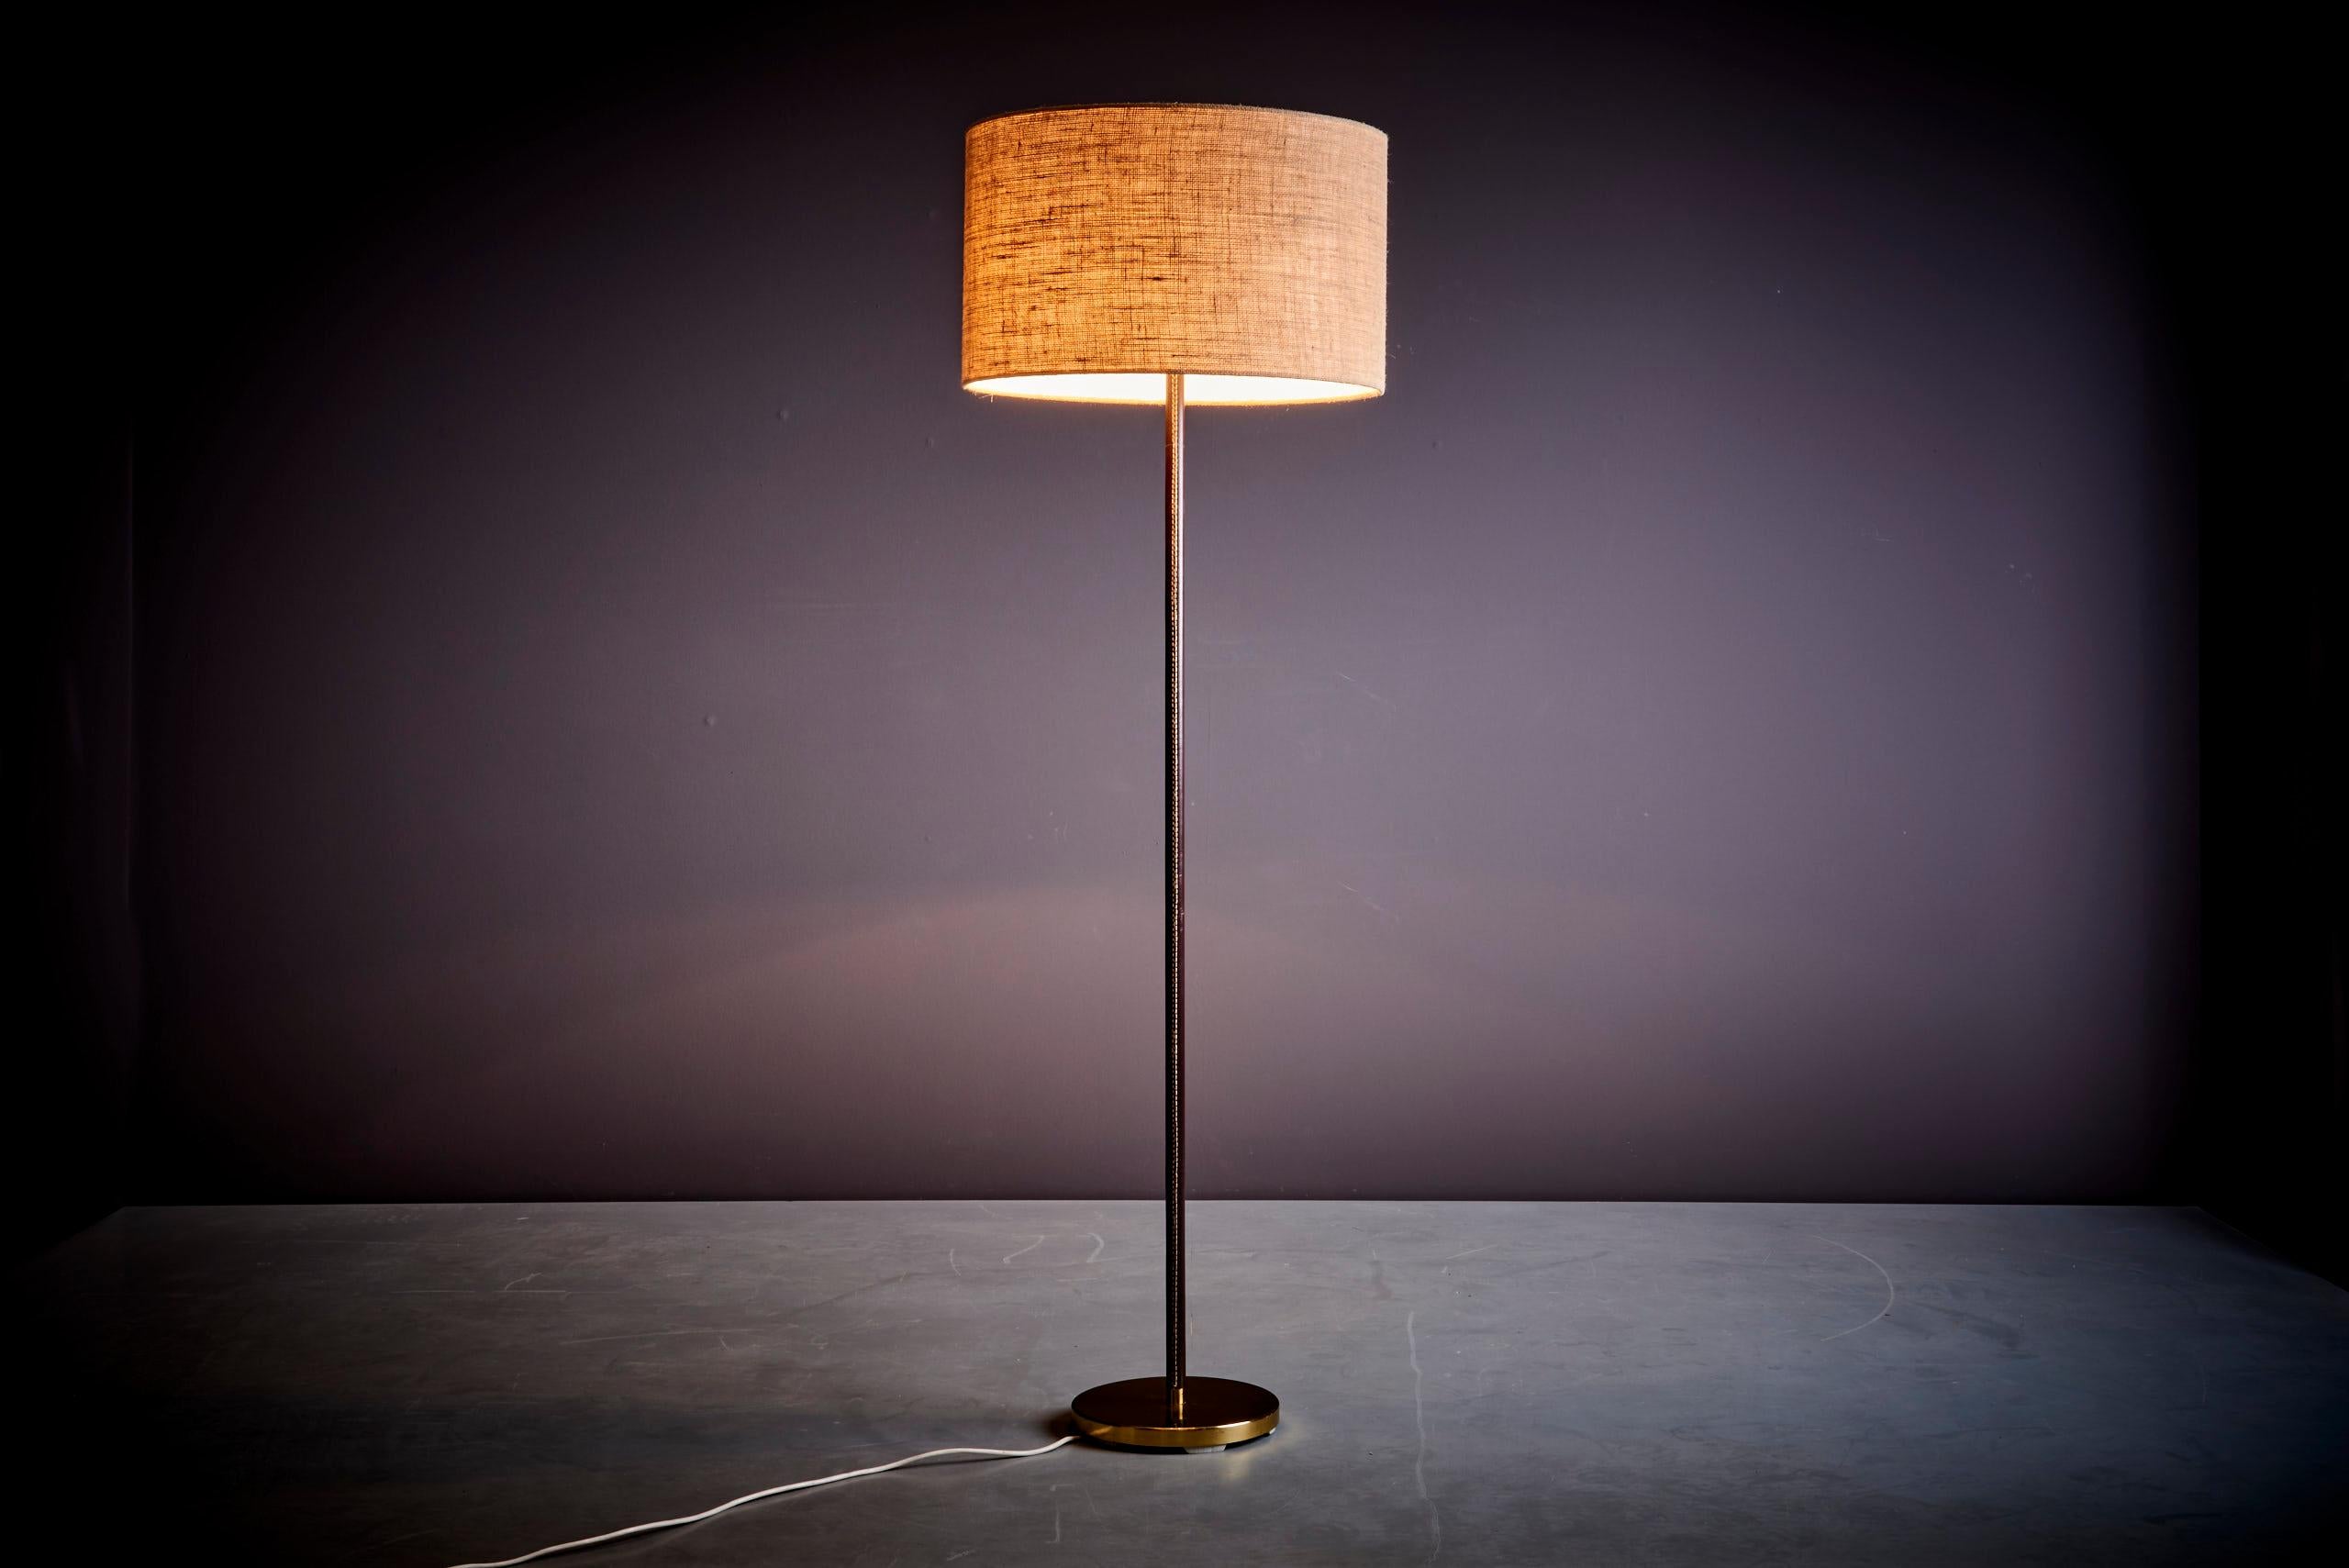 1 of 2 Kalmar Leuchten Leather Wrapped solid Brass floor lamp, Austria - 1960s. The measurements given apply to the lampbase.

Please note: Lamp should be fitted professionally in accordance to local requirements.